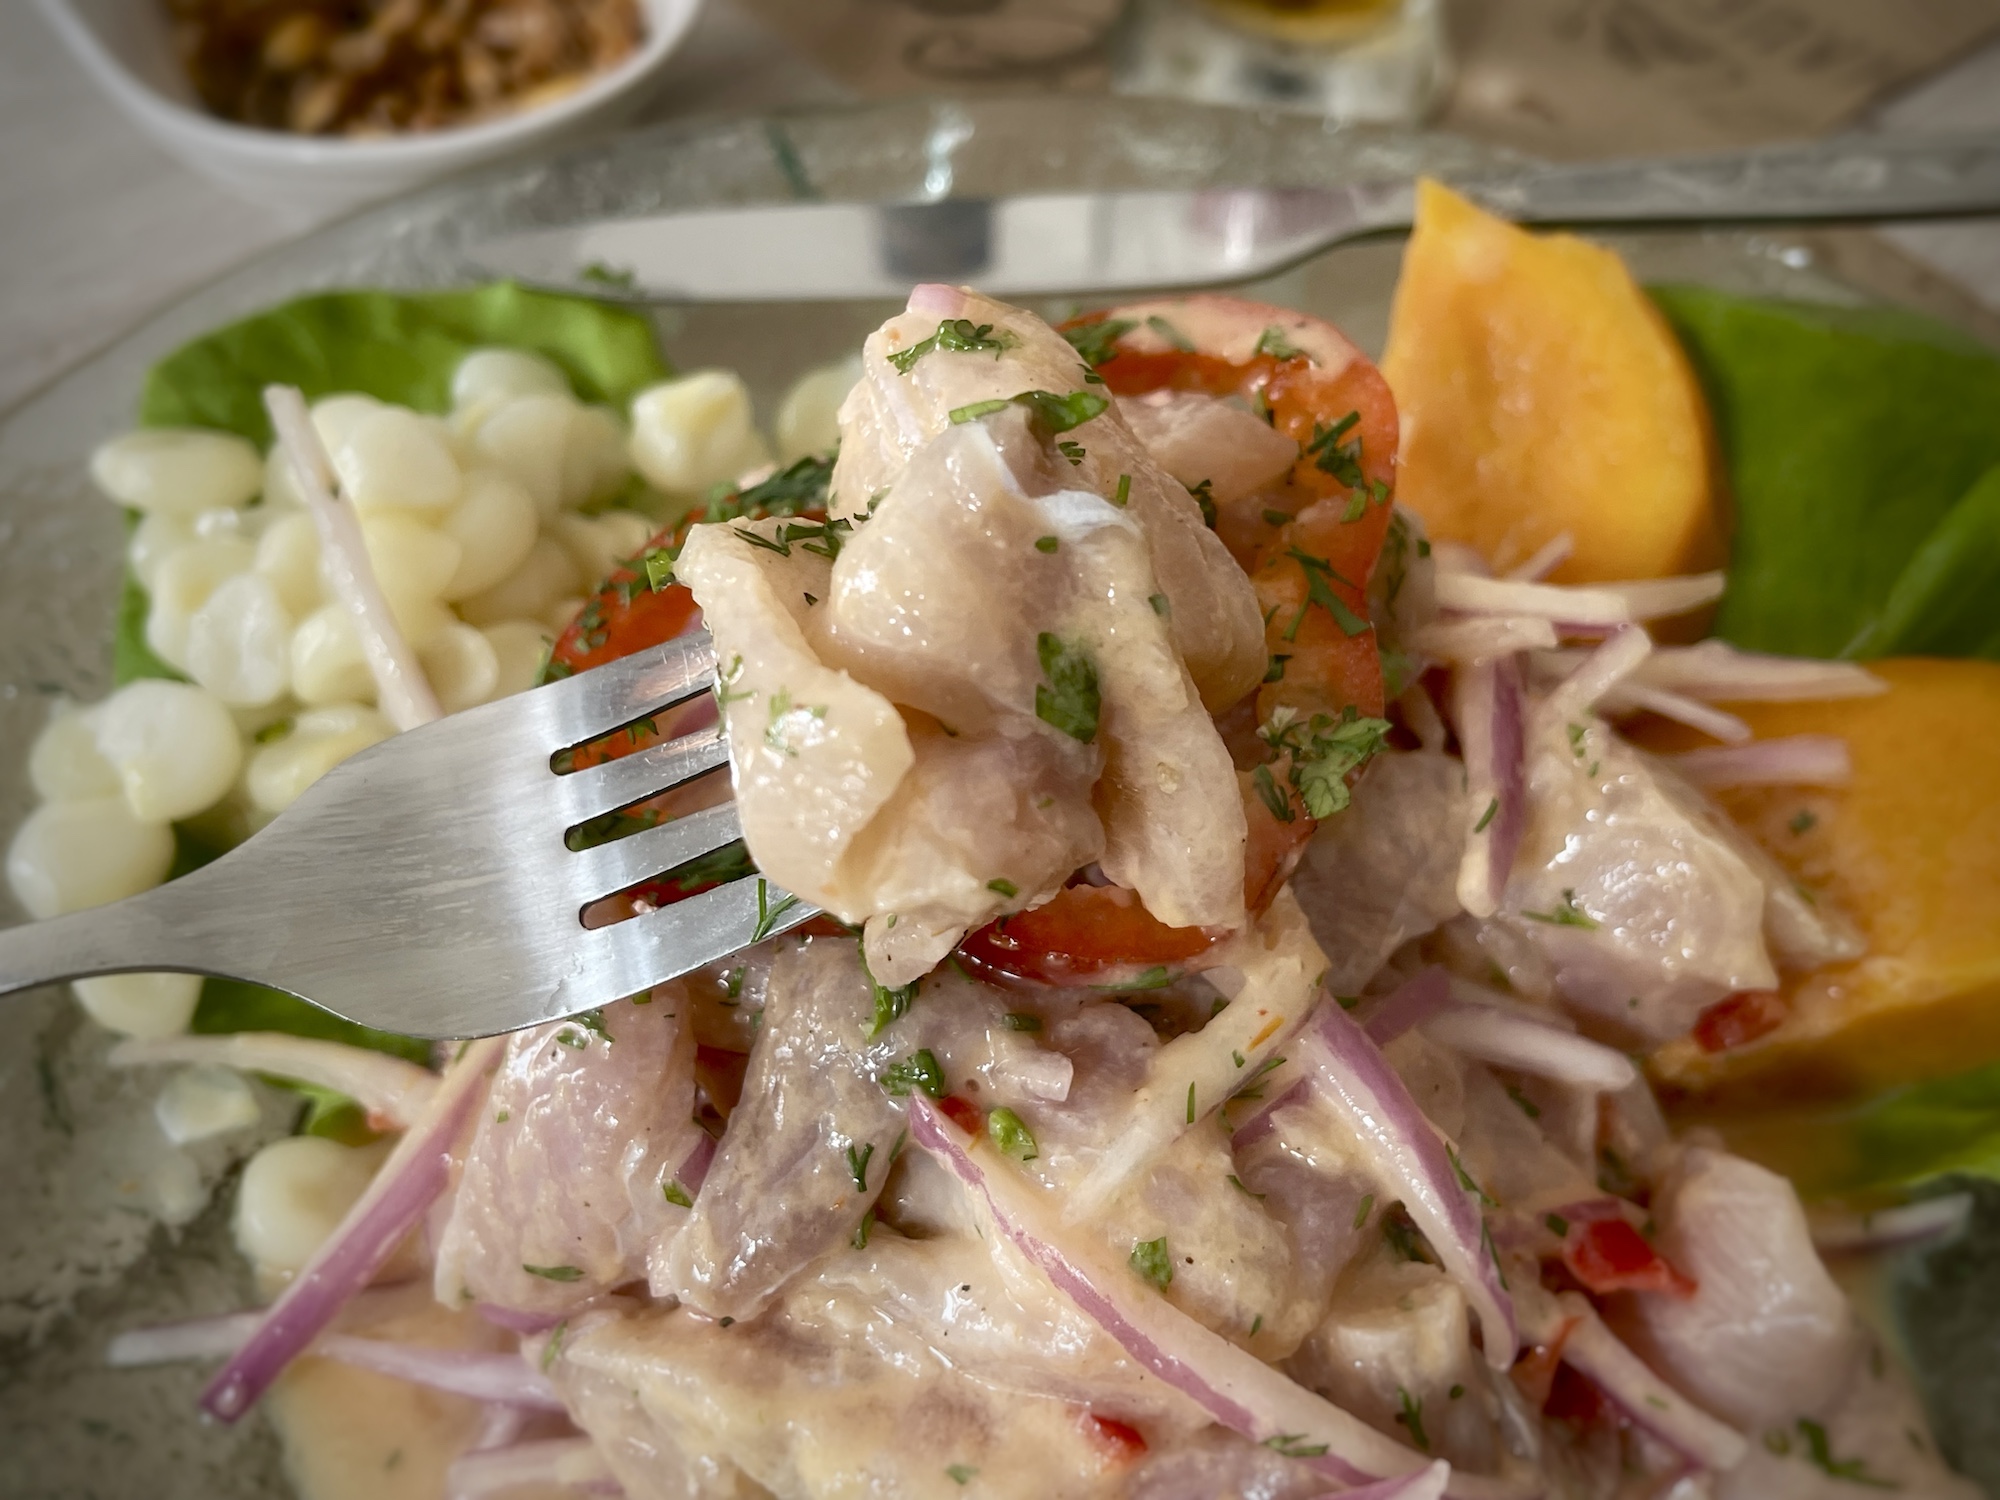 Craving Ceviche? A Few Of Lima’s Laid Back Cevicherias You’ve Got to Try!